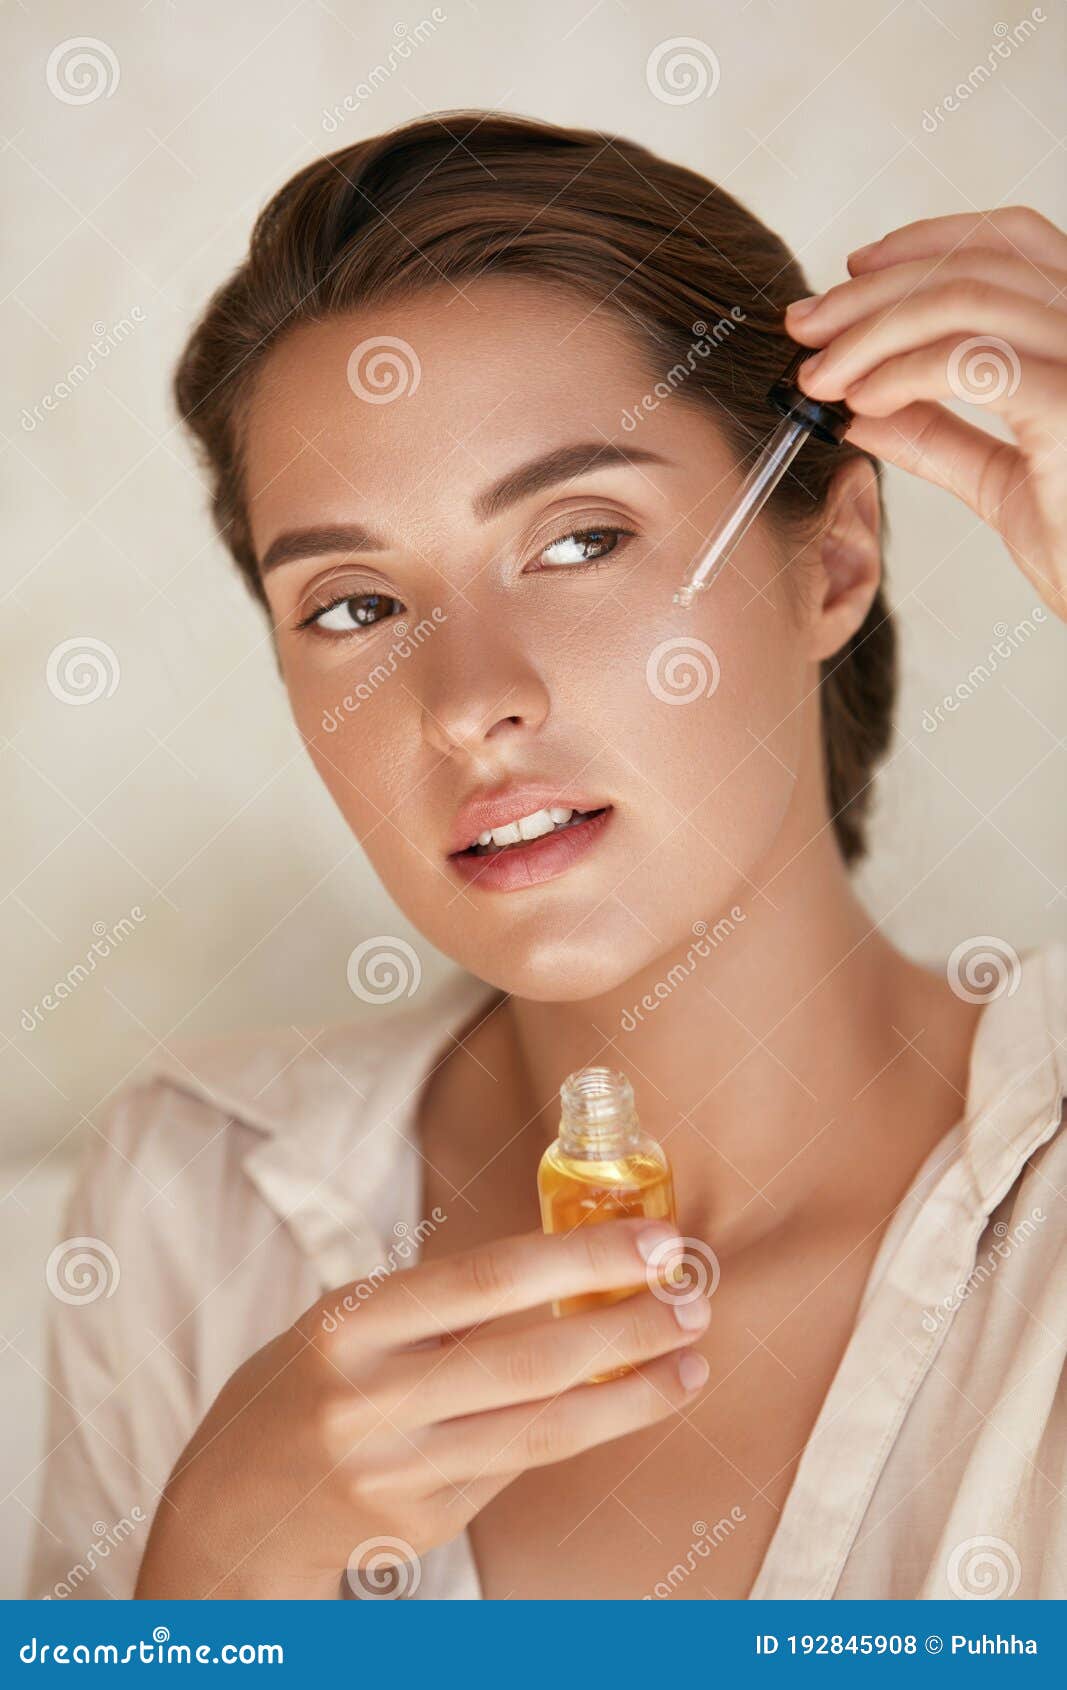 beauty face. woman applying essential oil on facial skin and looking away. beautiful model moisturizing derma.